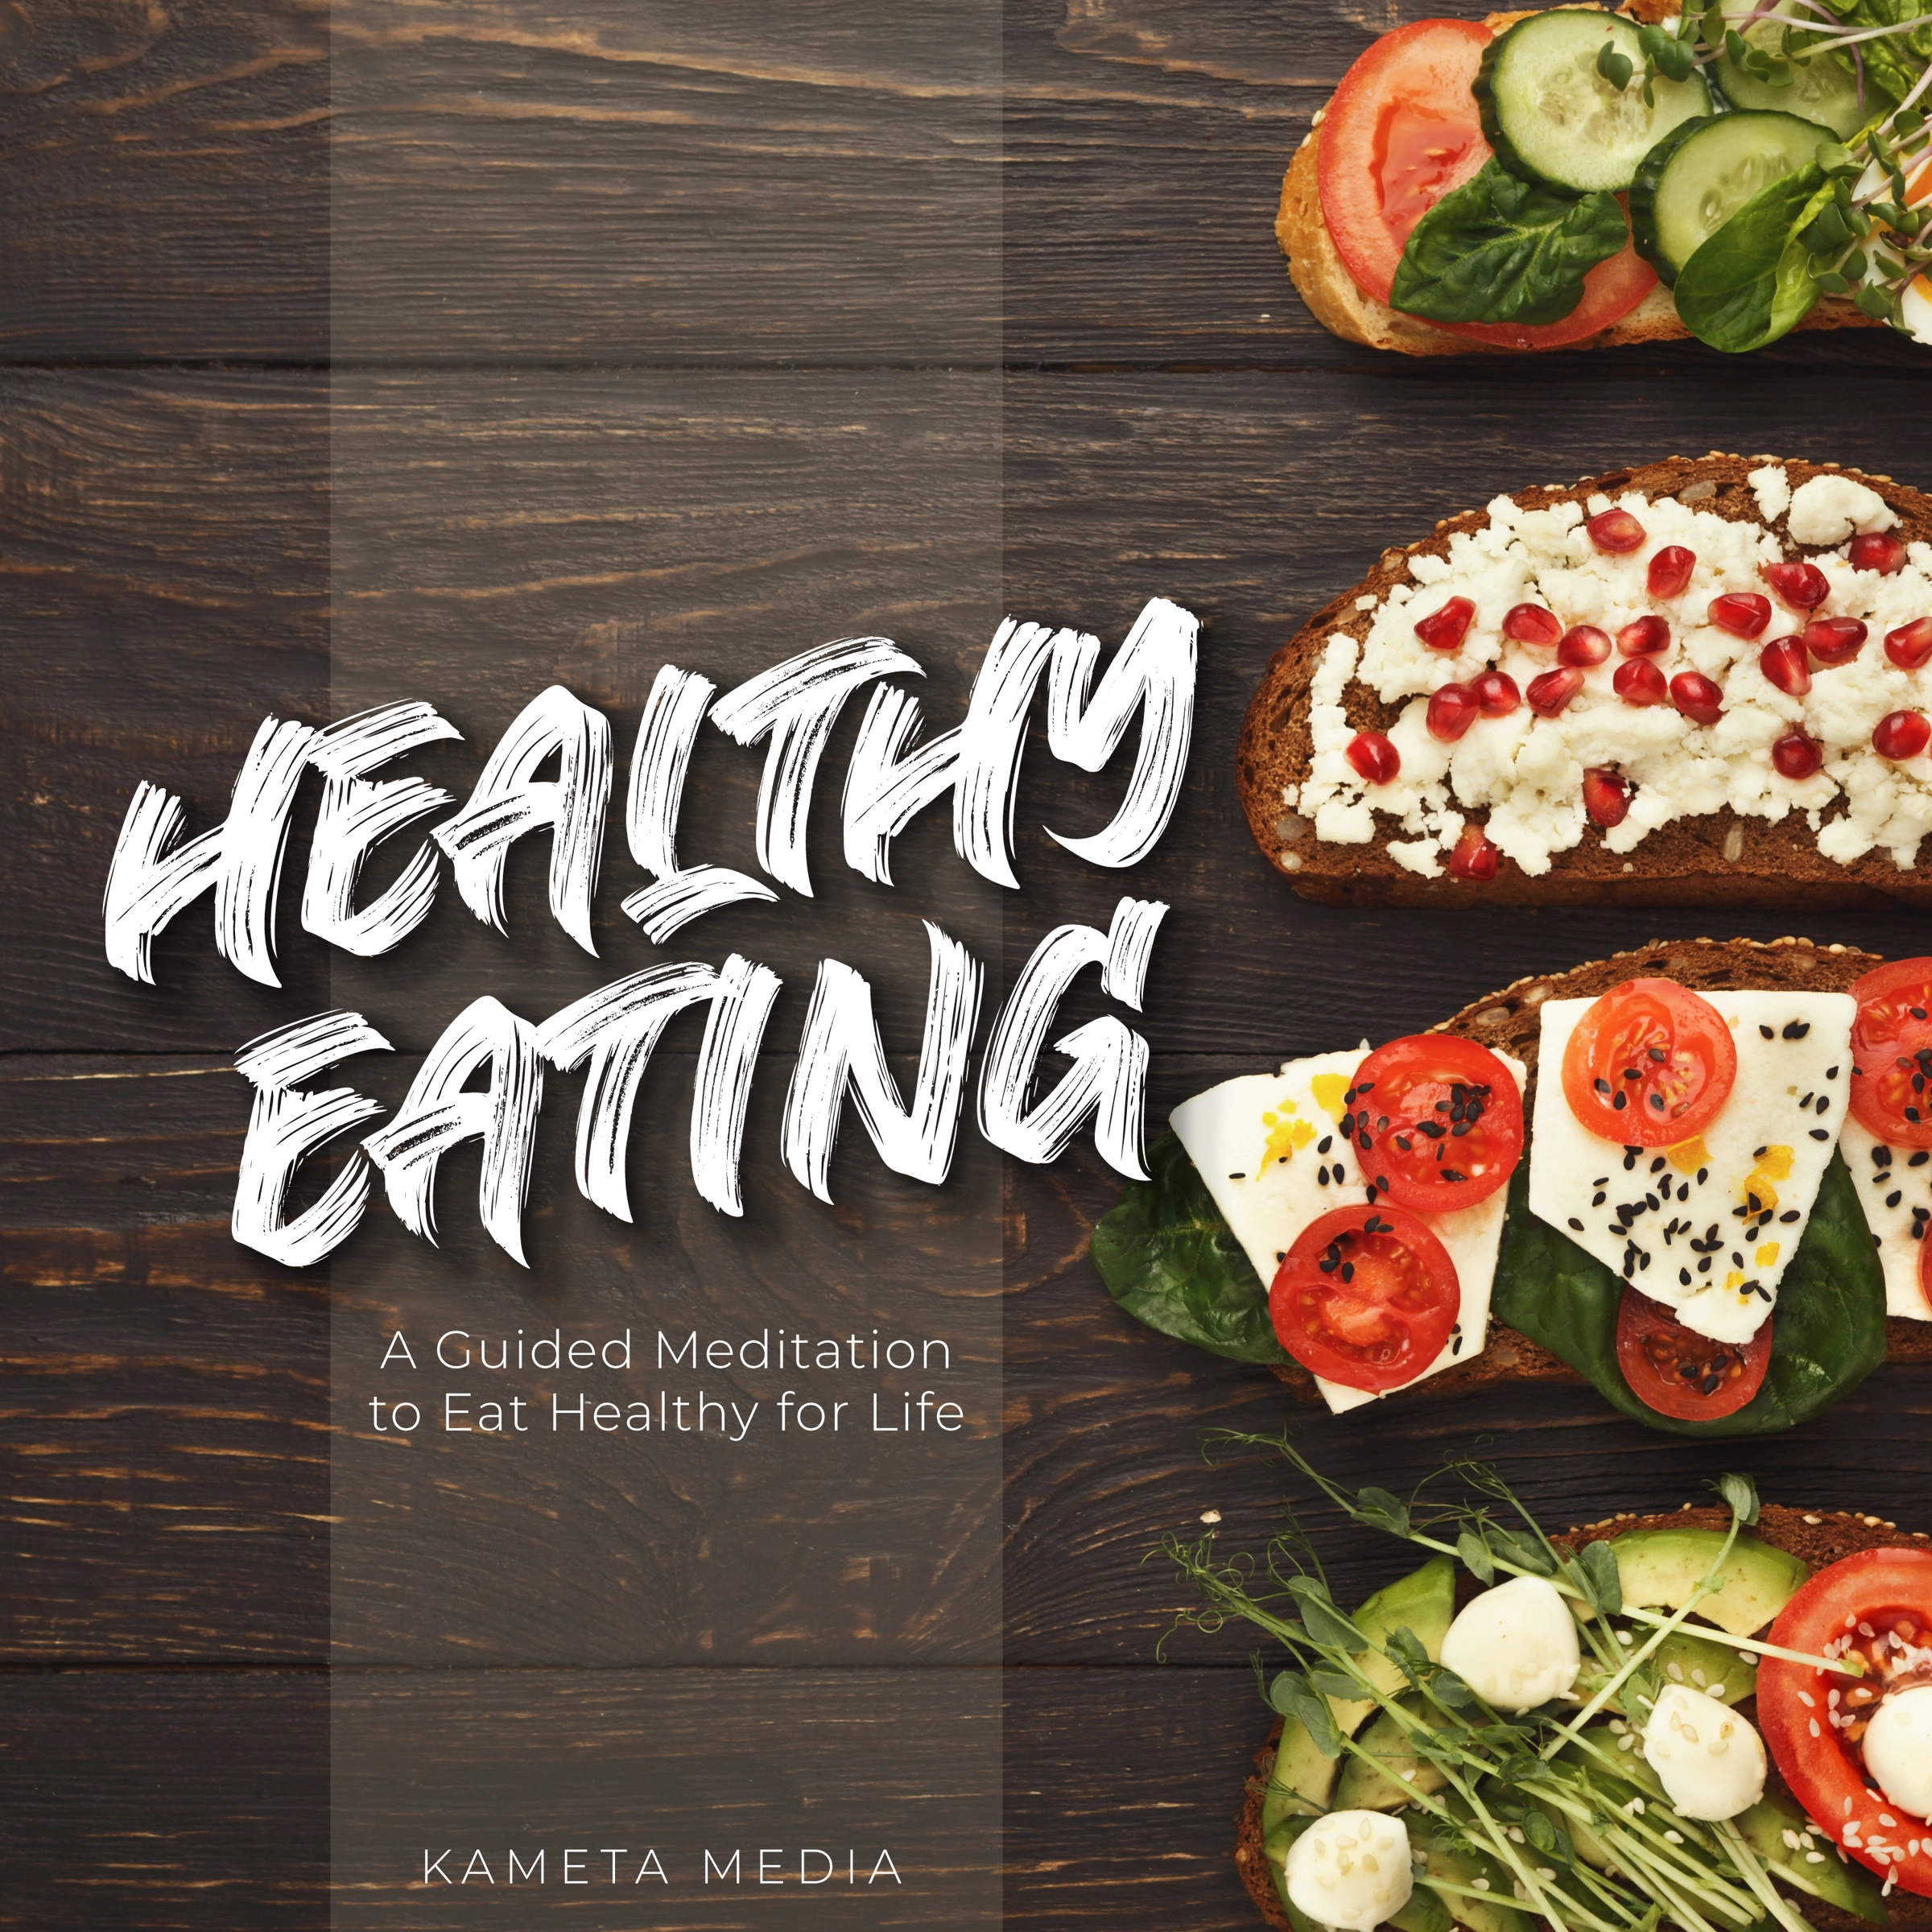 Healthy Eating: A Guided Meditation to Eat Healthy for Life Audiobook by Kameta Media